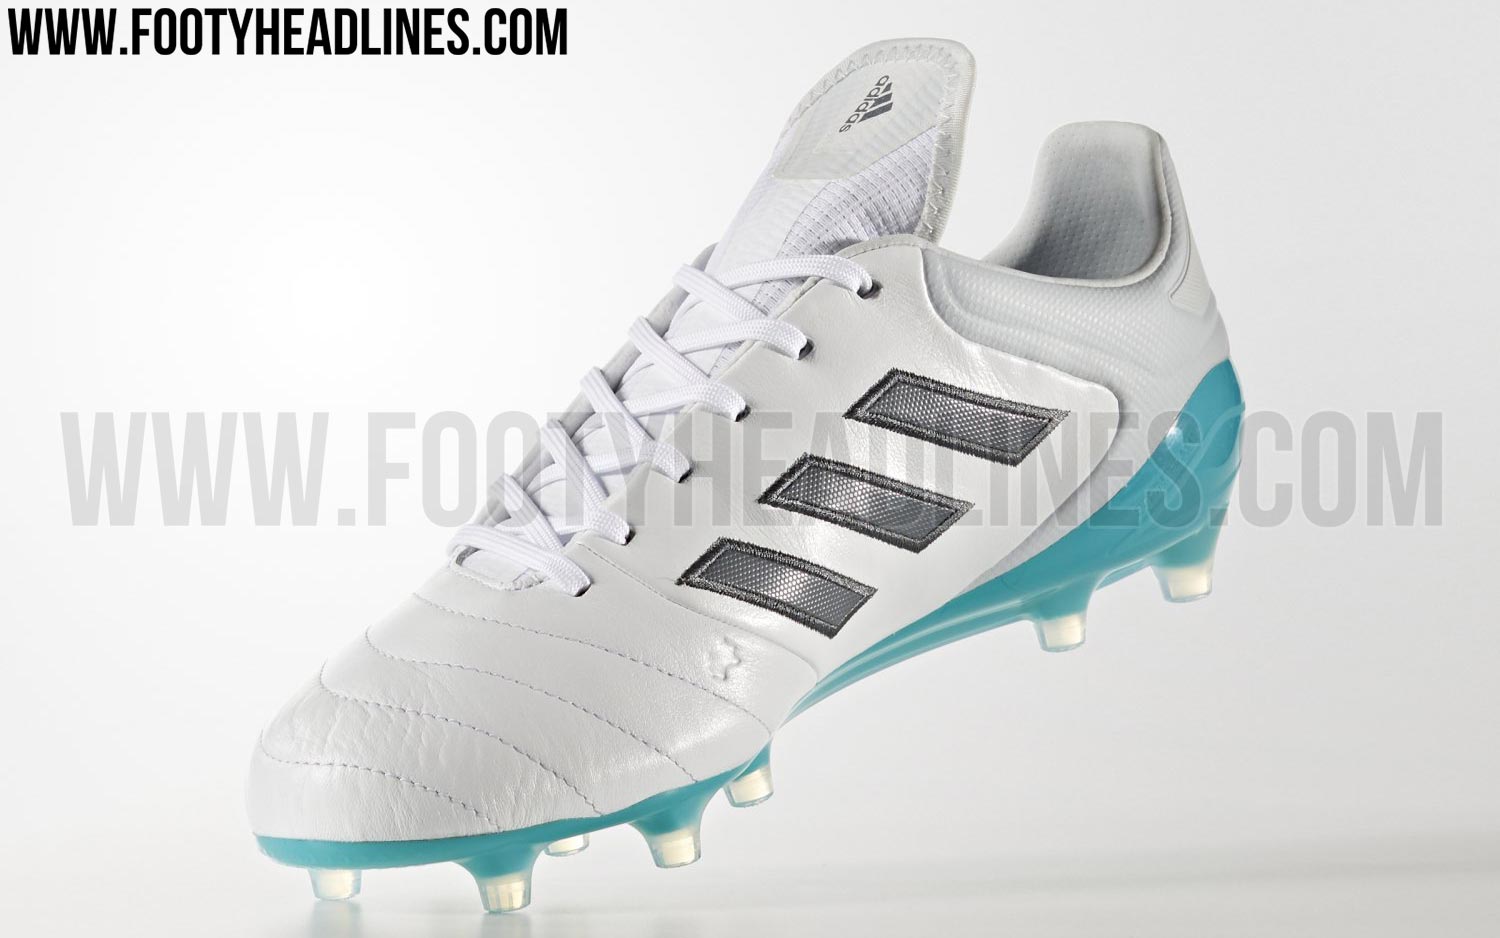 adidas soccer cleats copa mundial